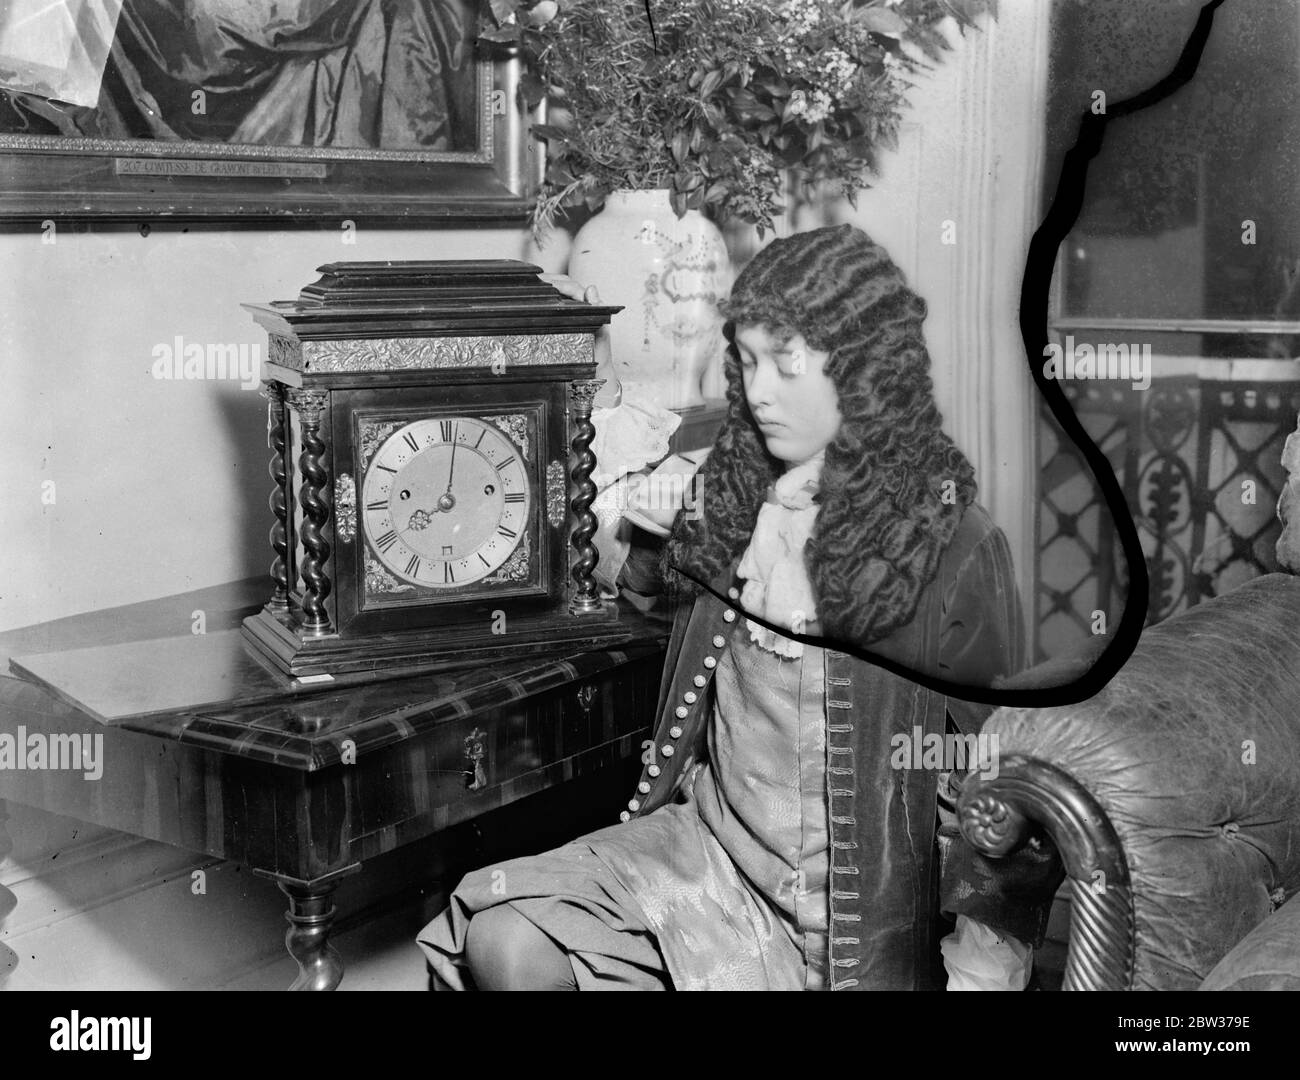 King Charles II exhibition of relics opens in London . An exhibition of the relics of the period King Charles II , was opened in London in aid of the young womens ' Christian Association at Grosvenor Place London . Illustrating King Charles passion for clocks a room has been set out with more than fifty clocks of his period . Photo shows Lauretta Hope Nicolson , beside a clock of the period of King Charles II , and dressed in the costume of that period . 28 January 1932 Stock Photo